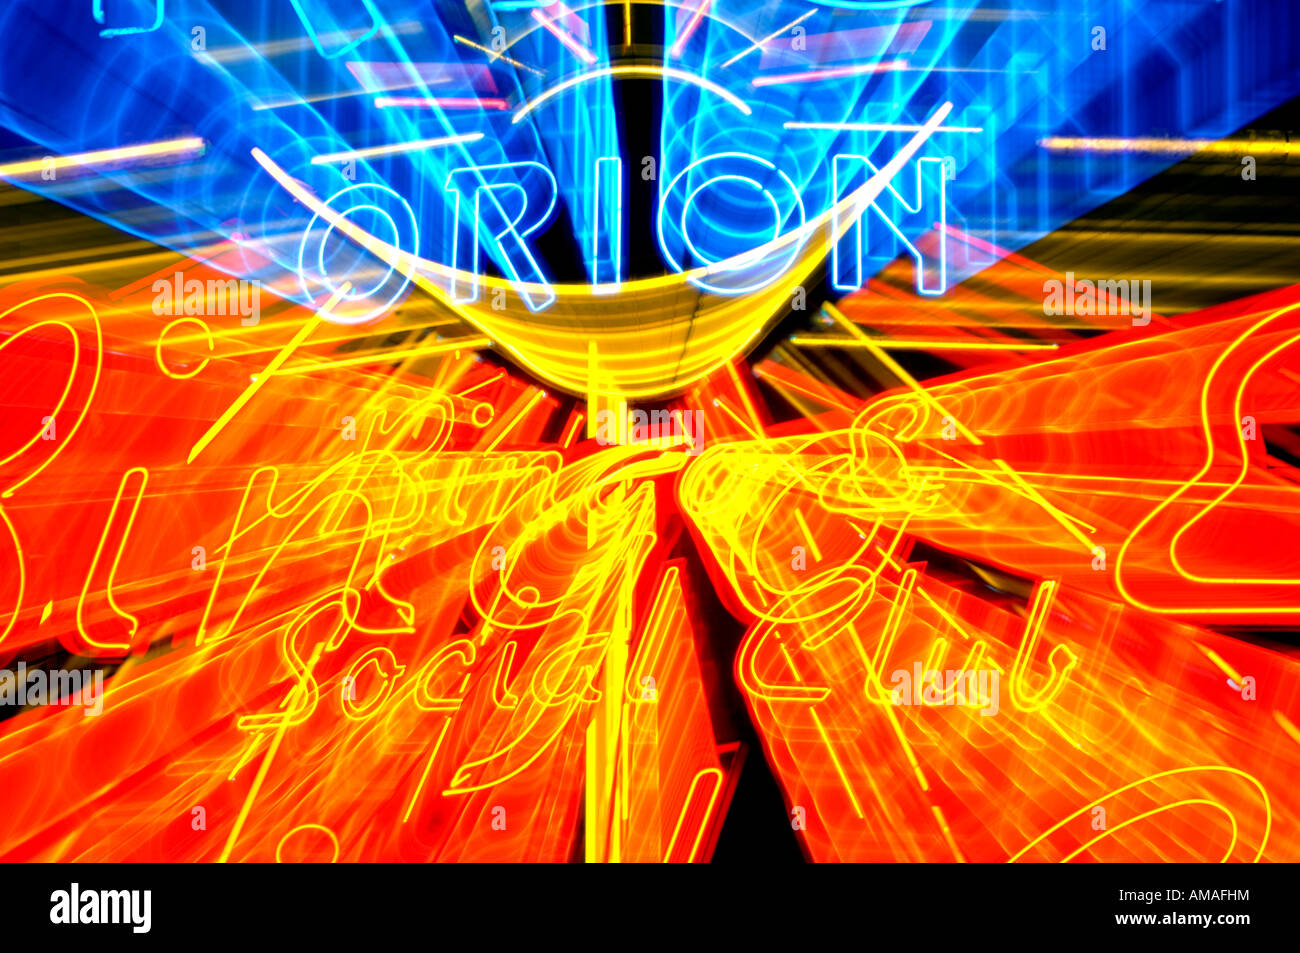 neon sign orion bingo social club zoomed during exposure for effect Stock Photo